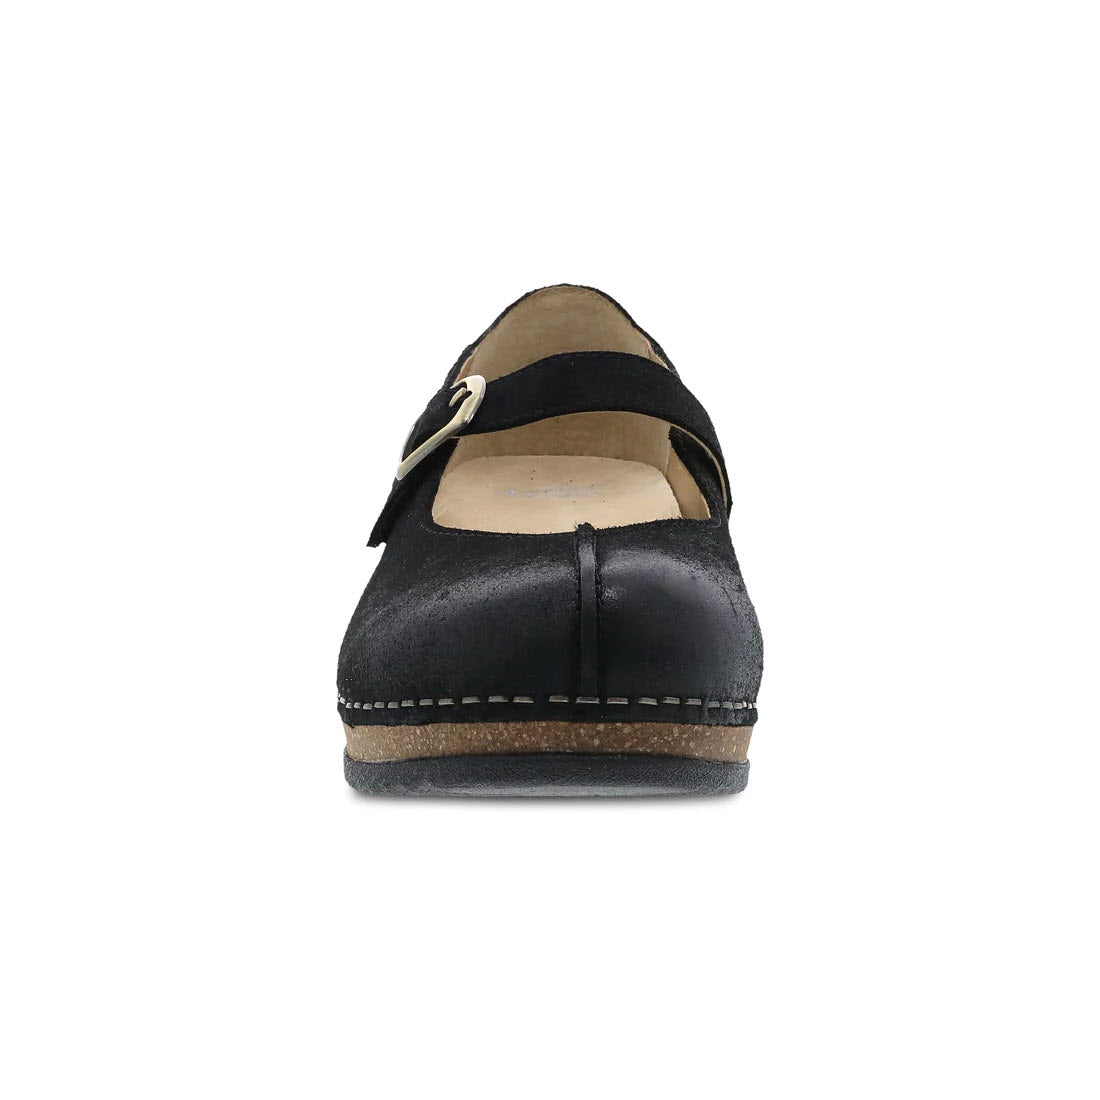 Front view of a single black Dansko Mika shoe crafted from high-quality leathers with a strap over the instep, displayed against a white background.